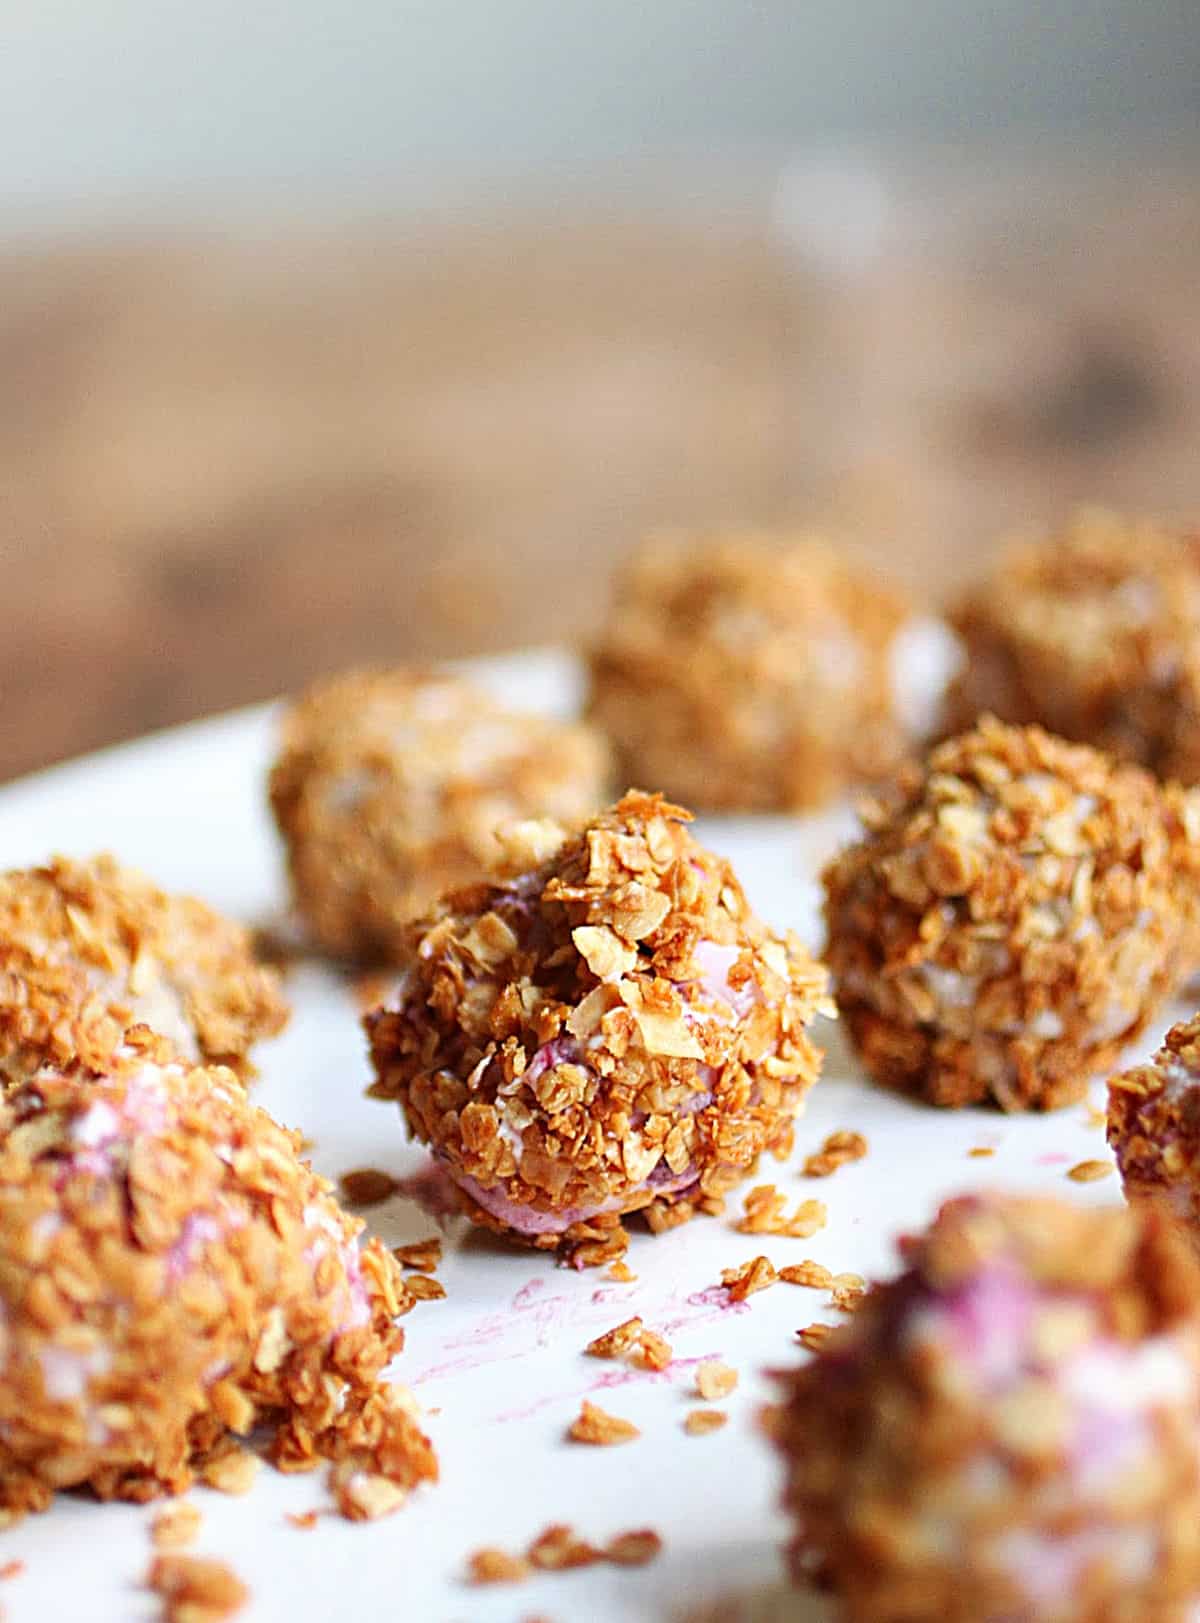 Ice cream truffles covered in granola on white plate.